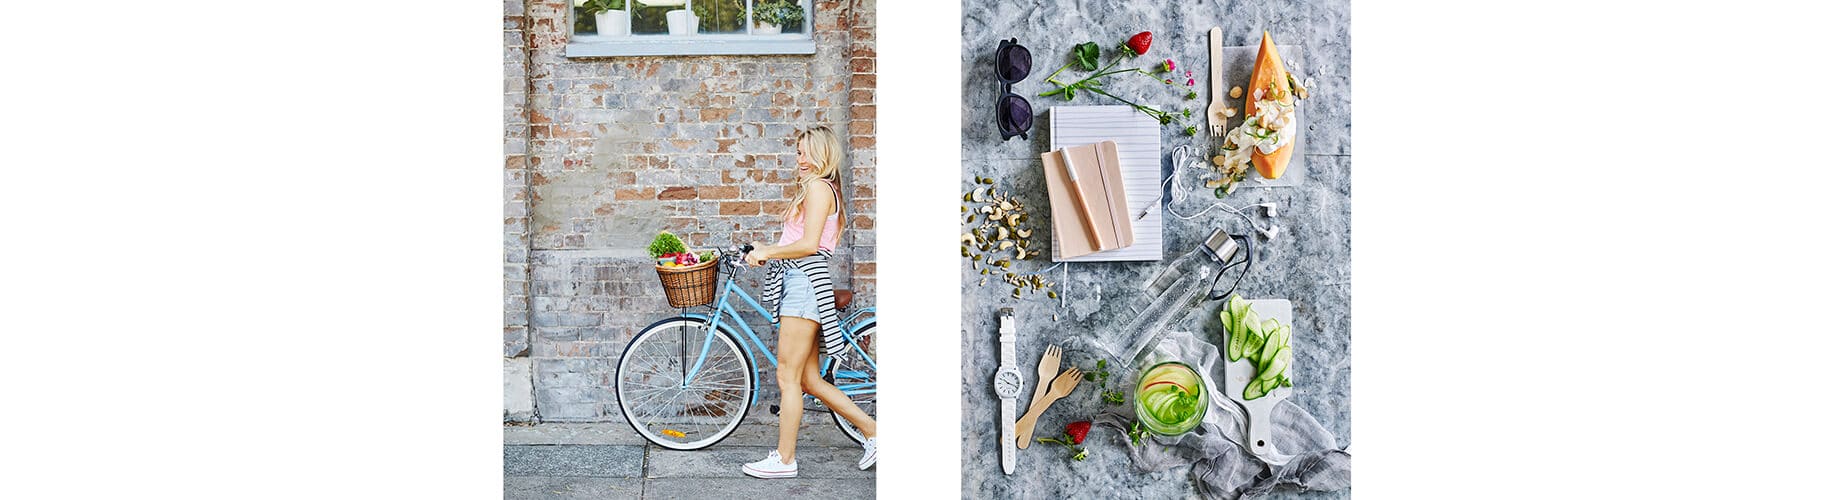 girl with basket of food and assorted items flat lay photography